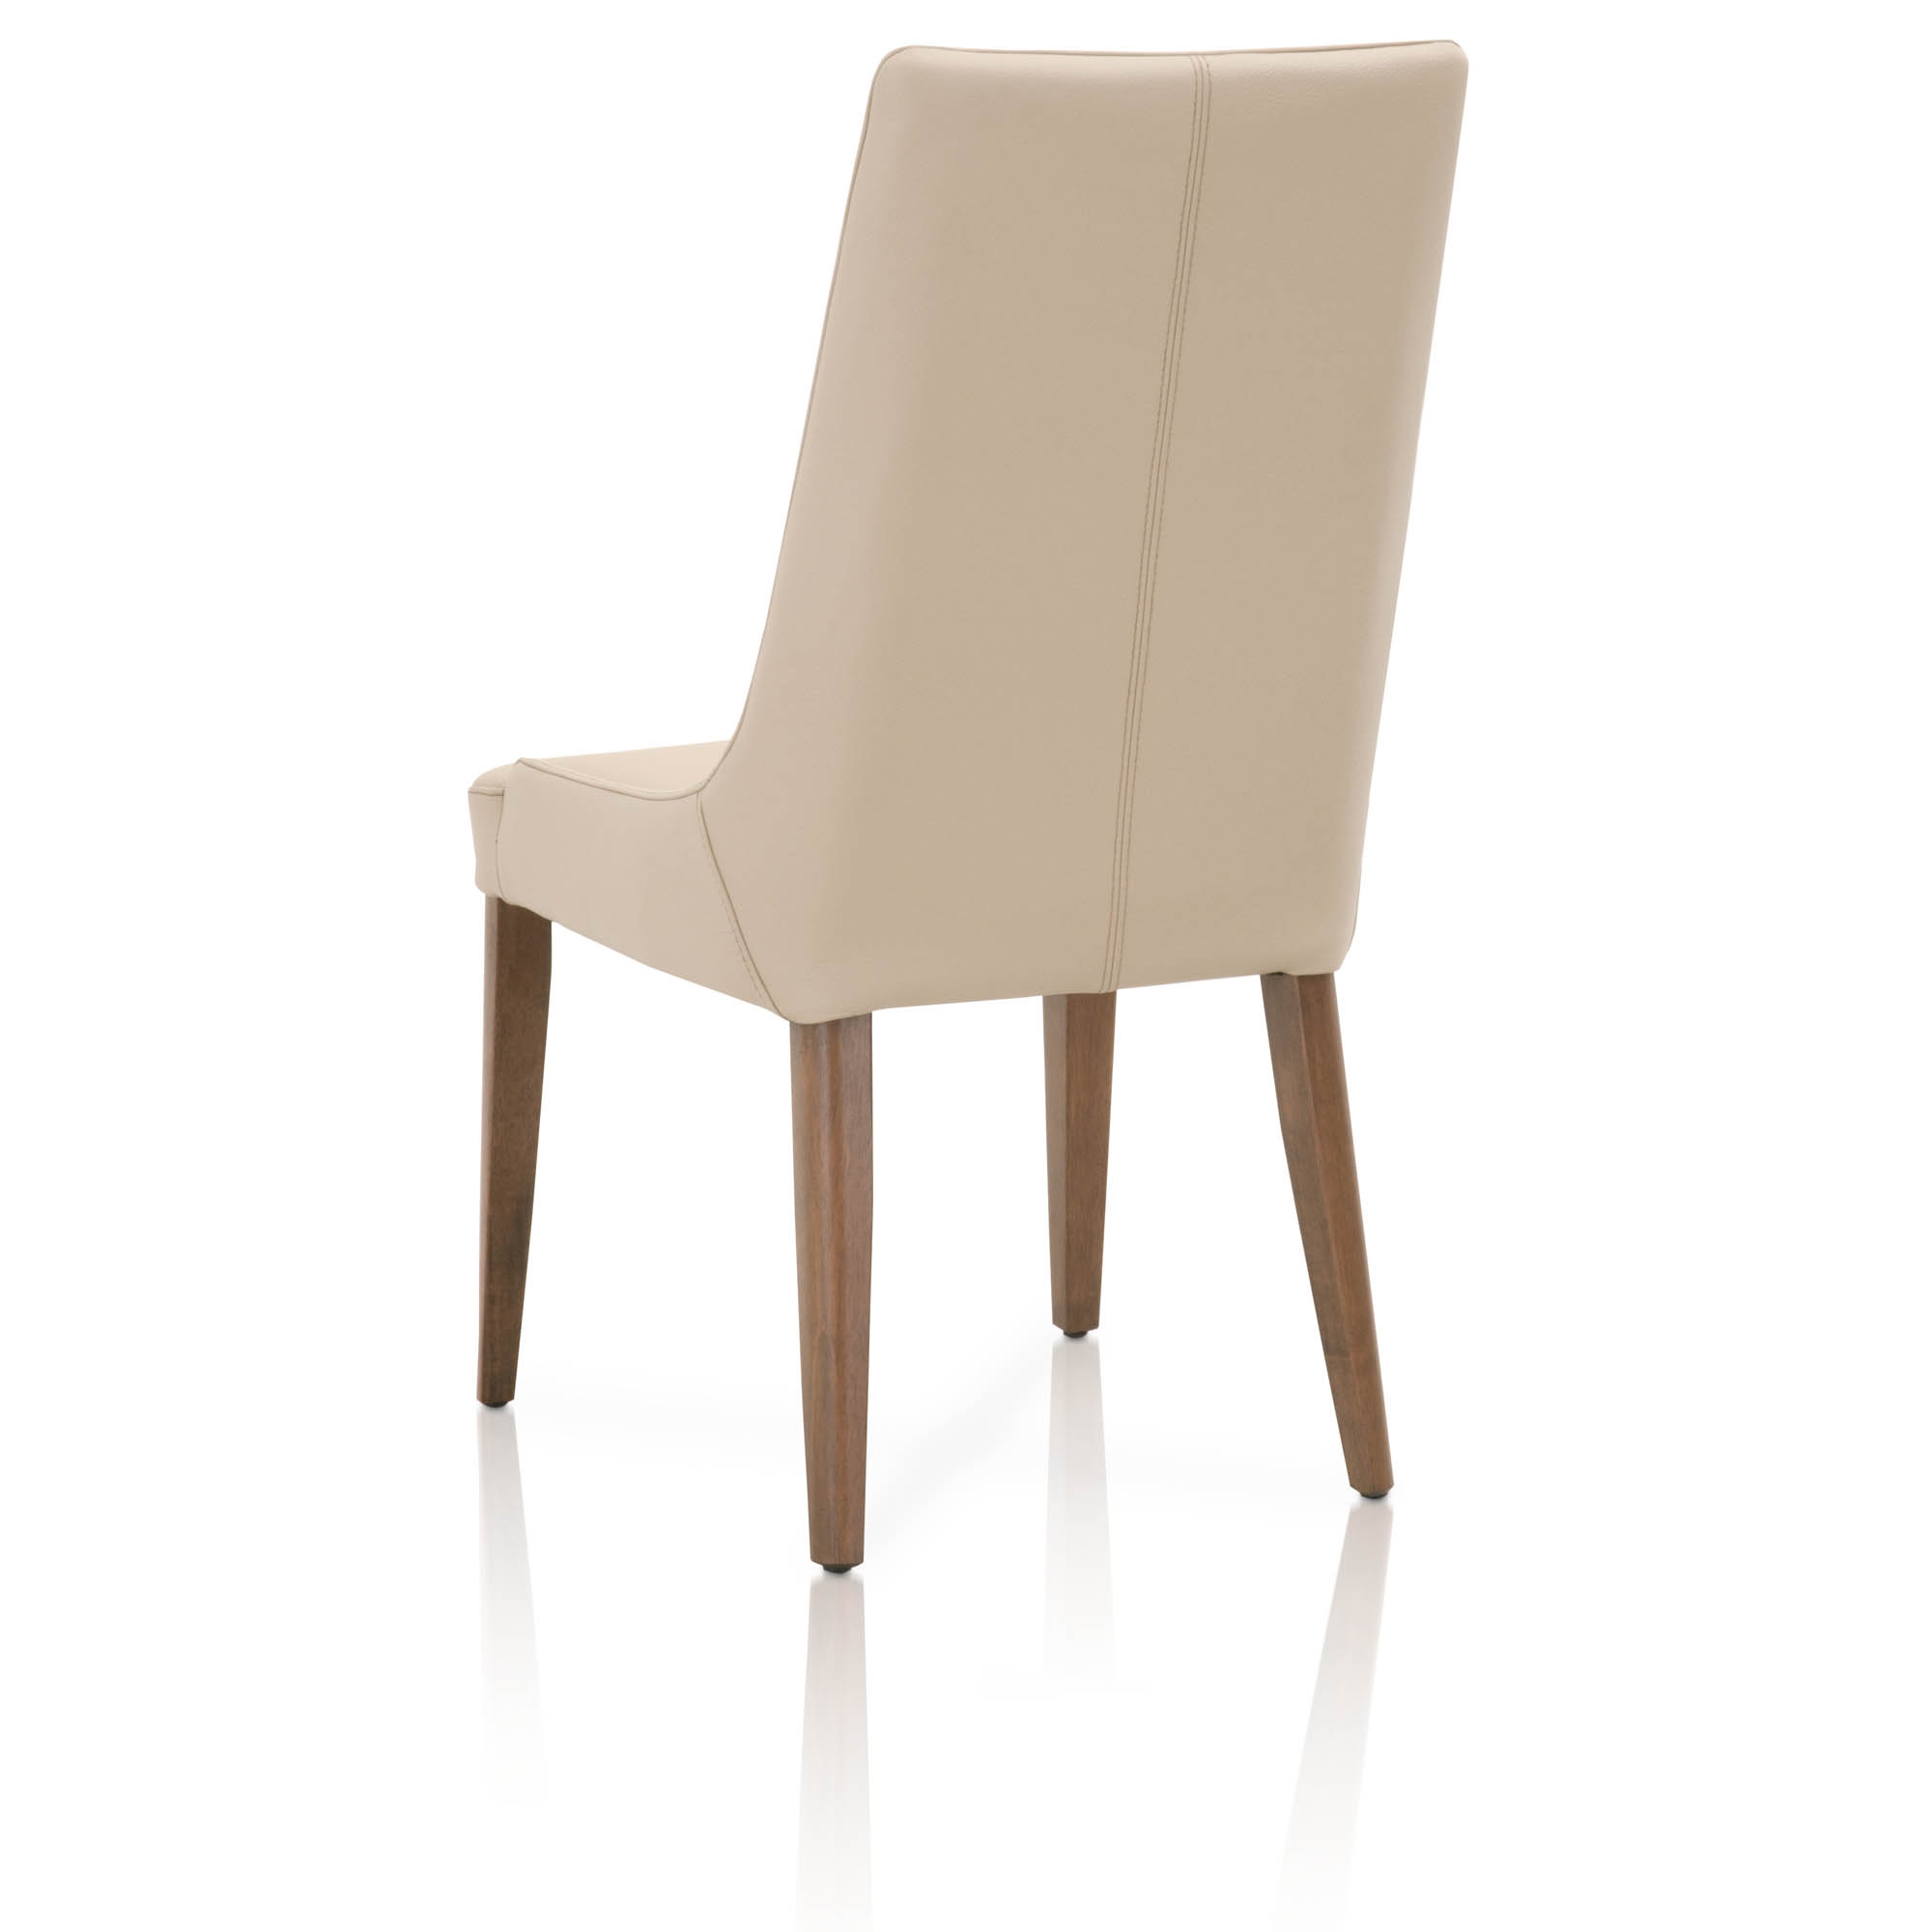 Aurora Dining Chair, Set of 2 - Image 3